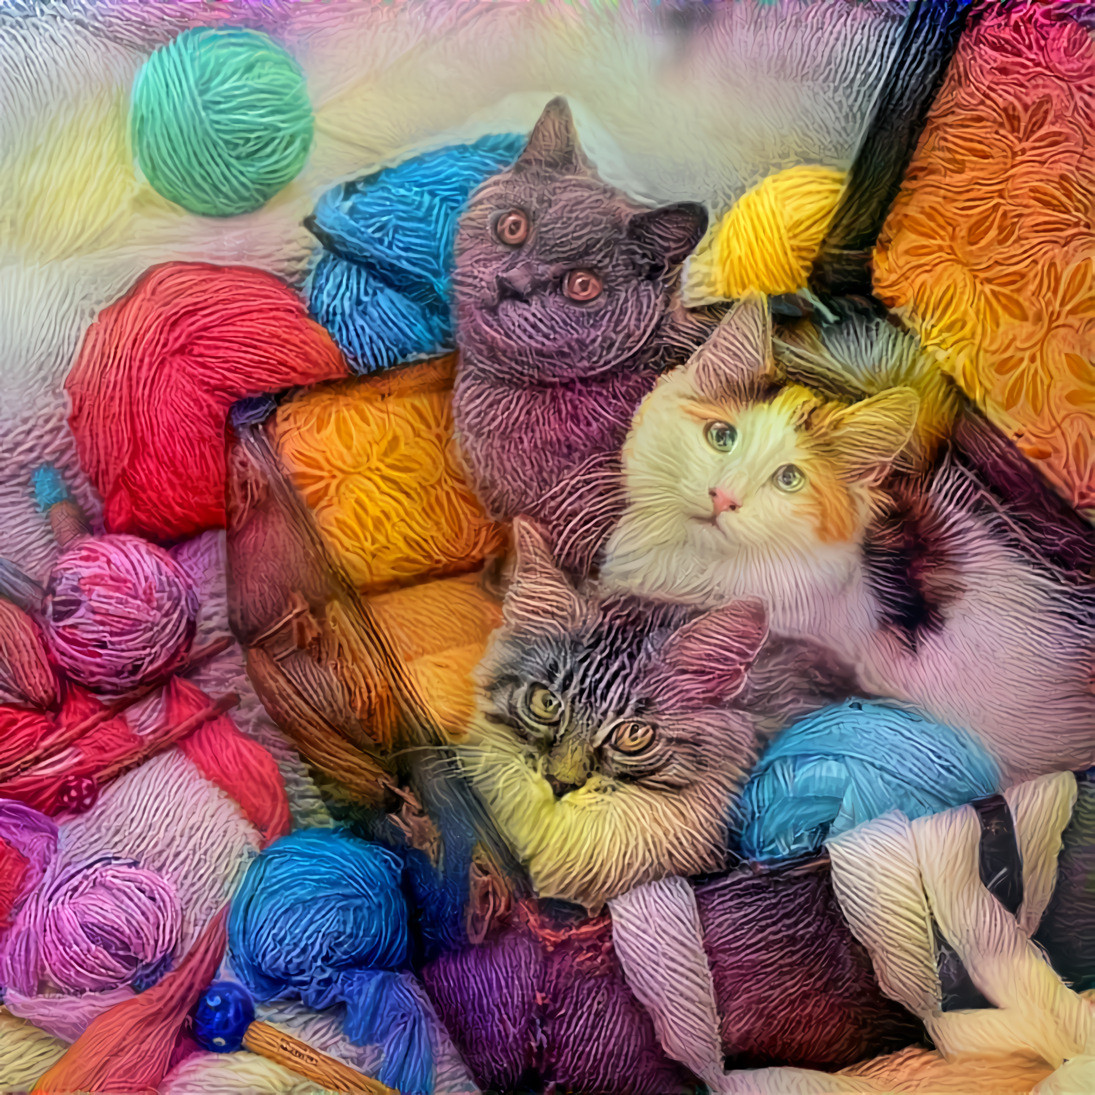 Kittens and yarn